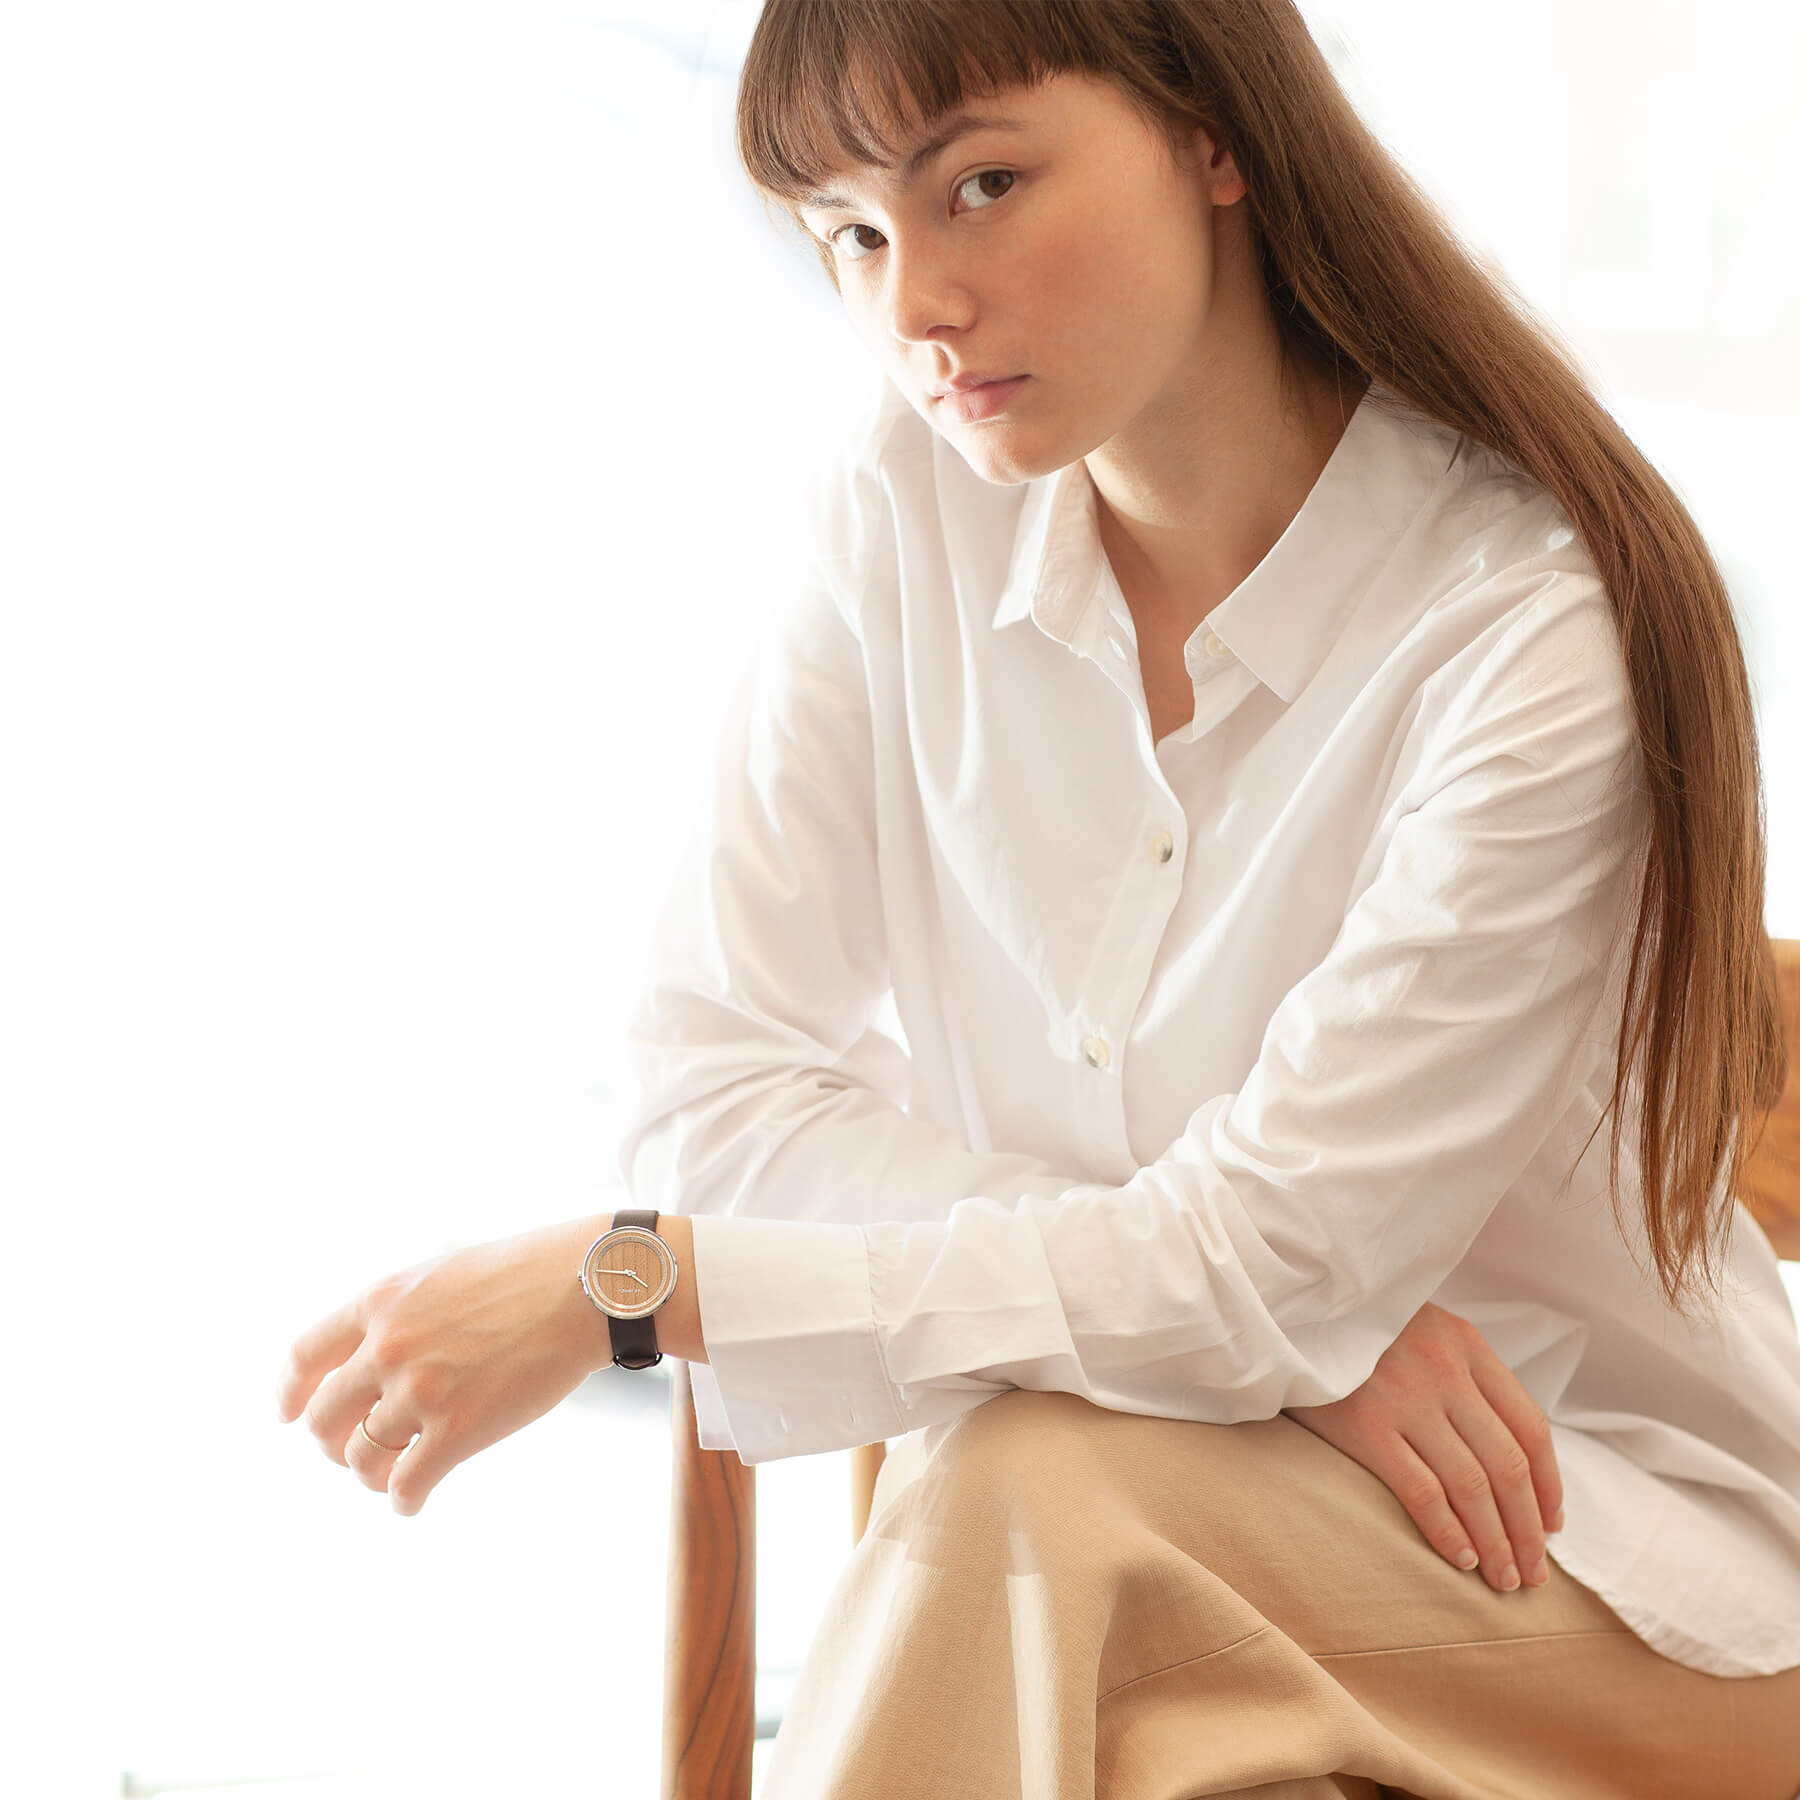 Young woman wearing a simple wooden watch with white shirt